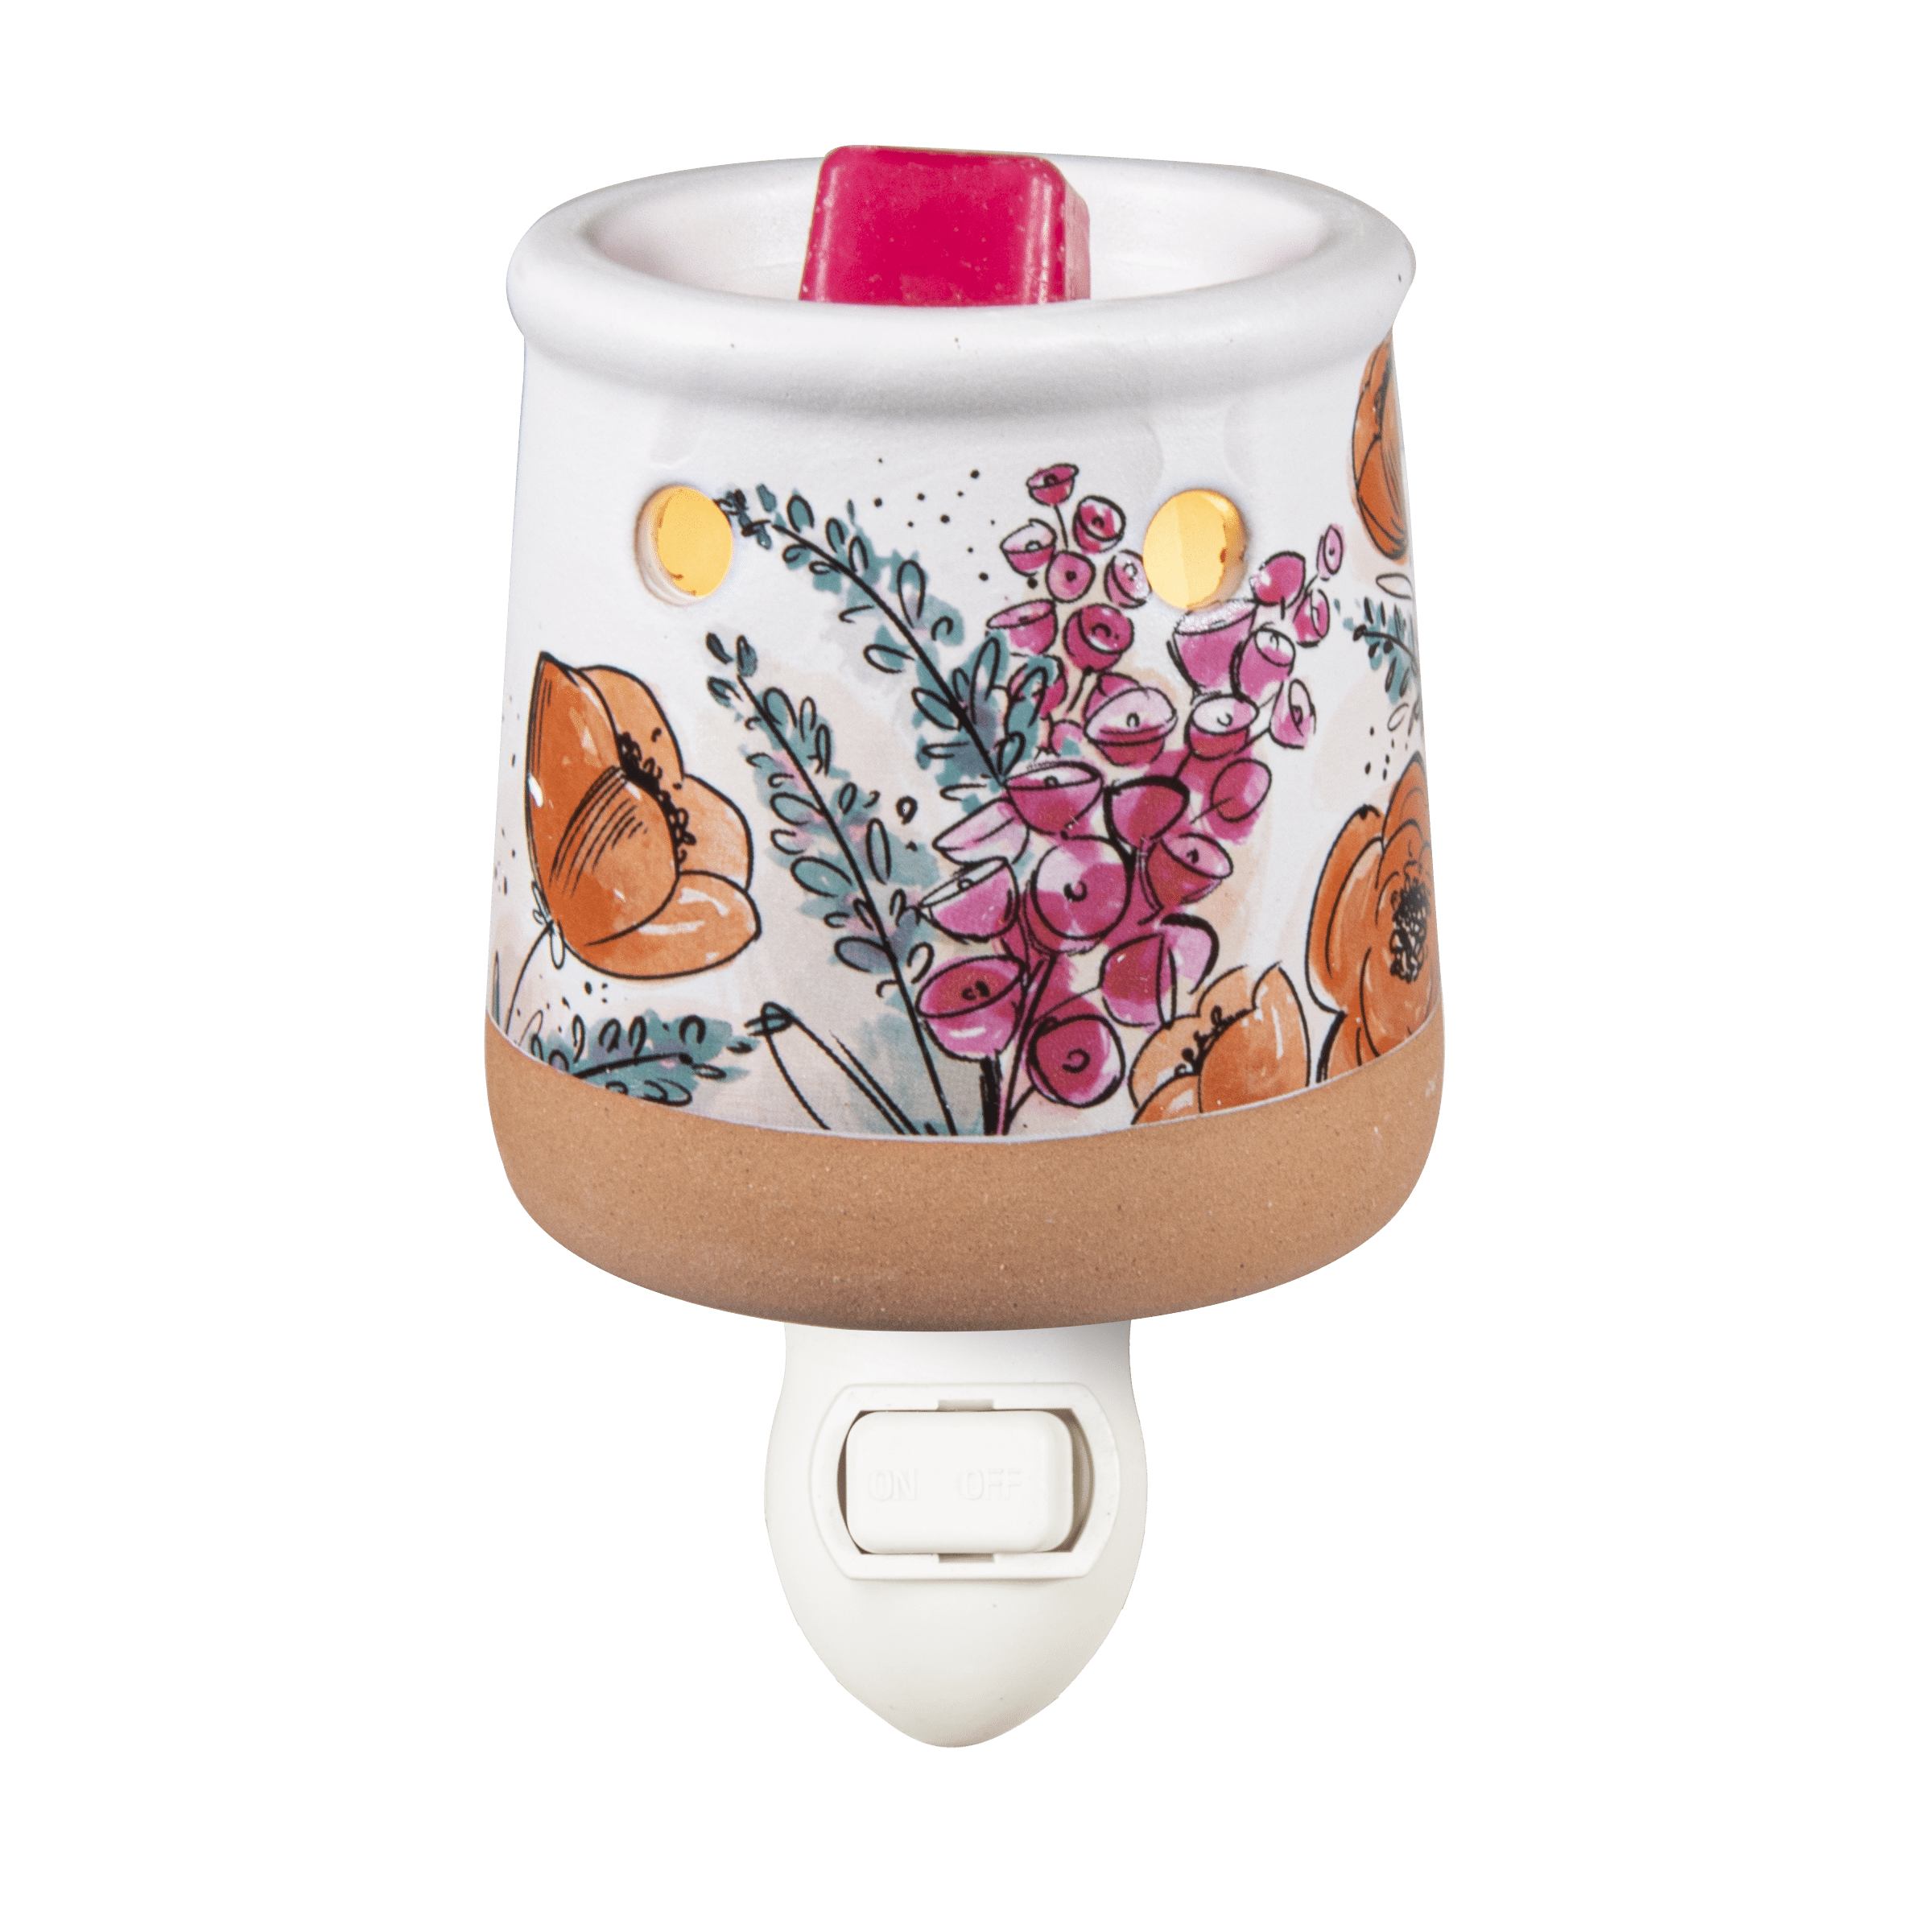 Hope Blooms Scentsy Warmer | Charitable Cause Fall 2021